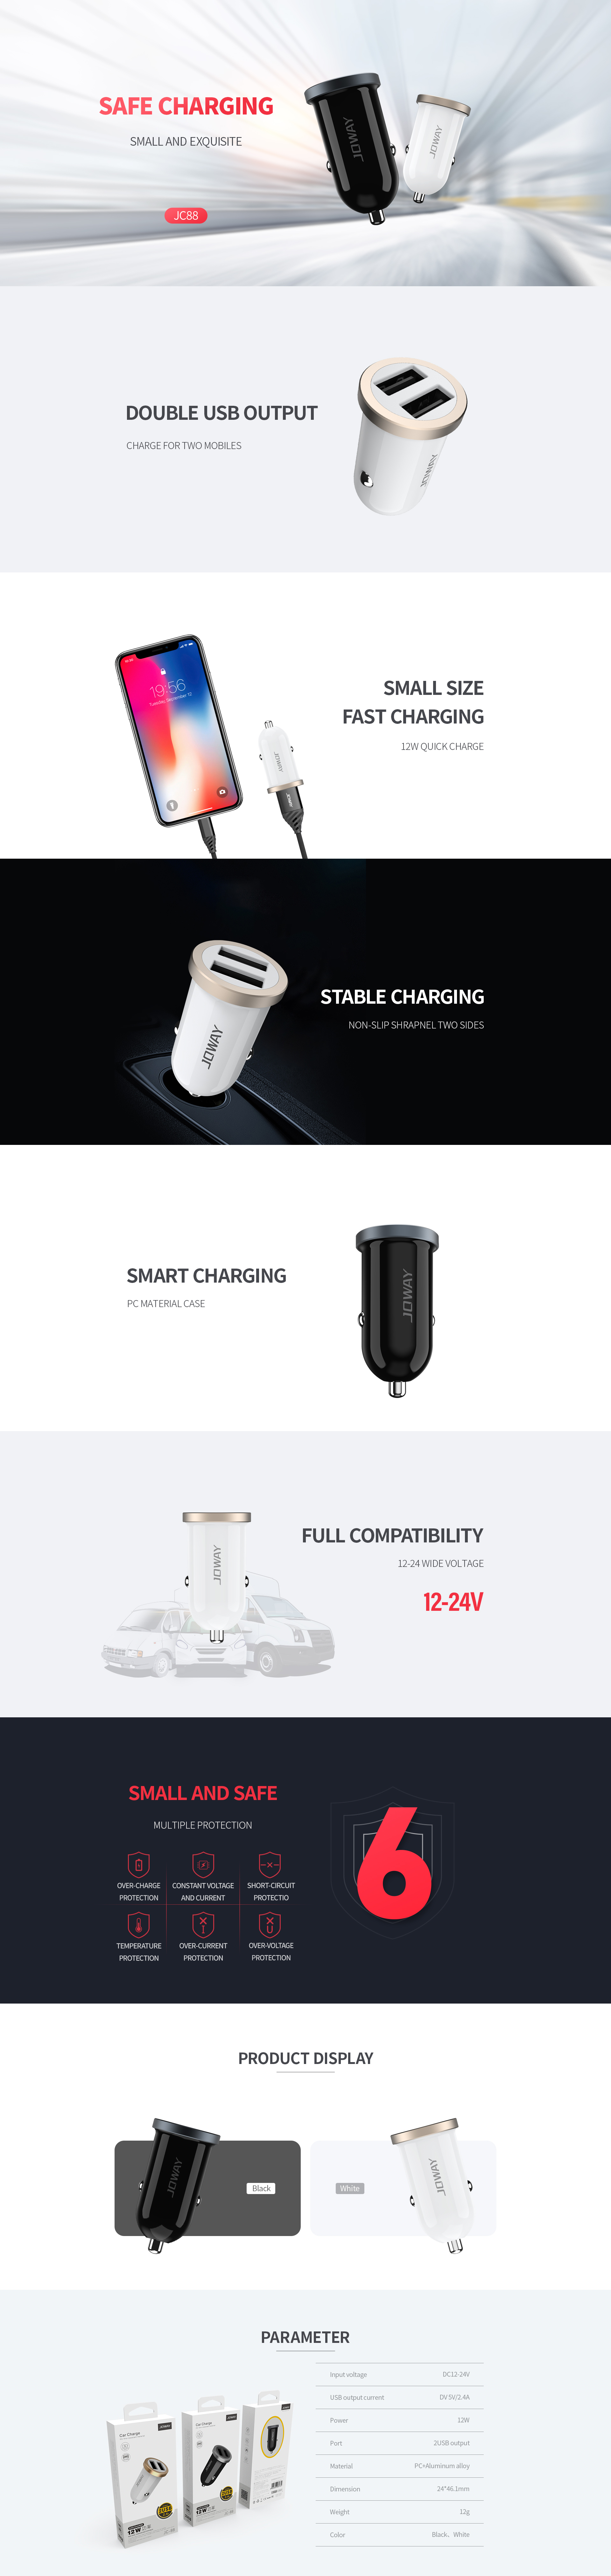 JOWAY-12W-Double-USB-Car-Charger-Fast-Charging-for-iPhone-12-Pro-Max-for-Samsung-Galaxy-Note-S20-ult-1825726-1